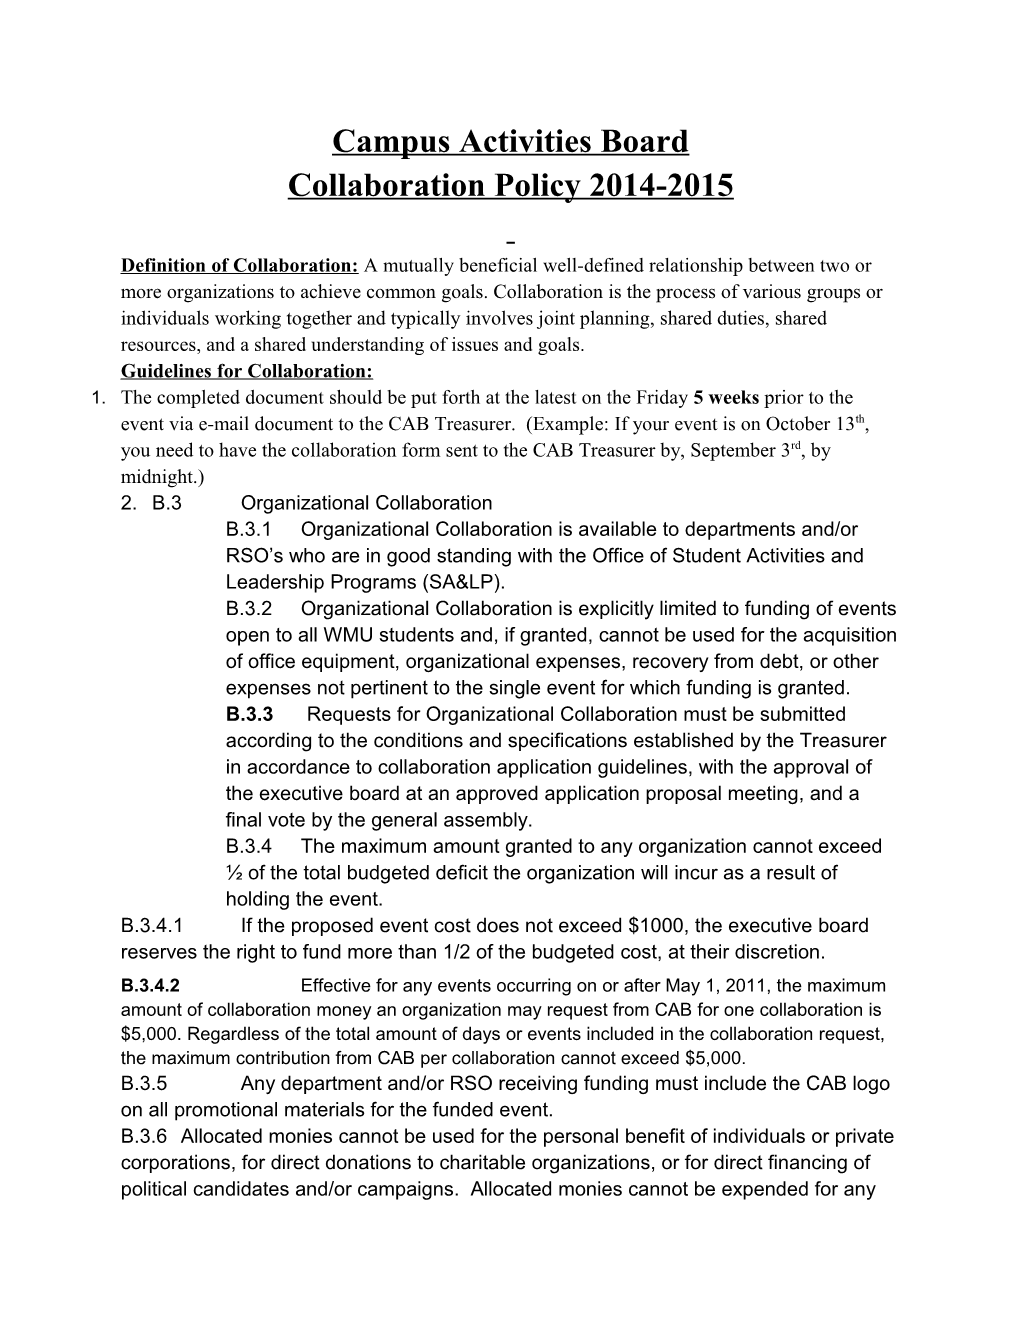 CAB Collaboration Policy Collaboration Proposal.Gdoc (TEMPLATE)